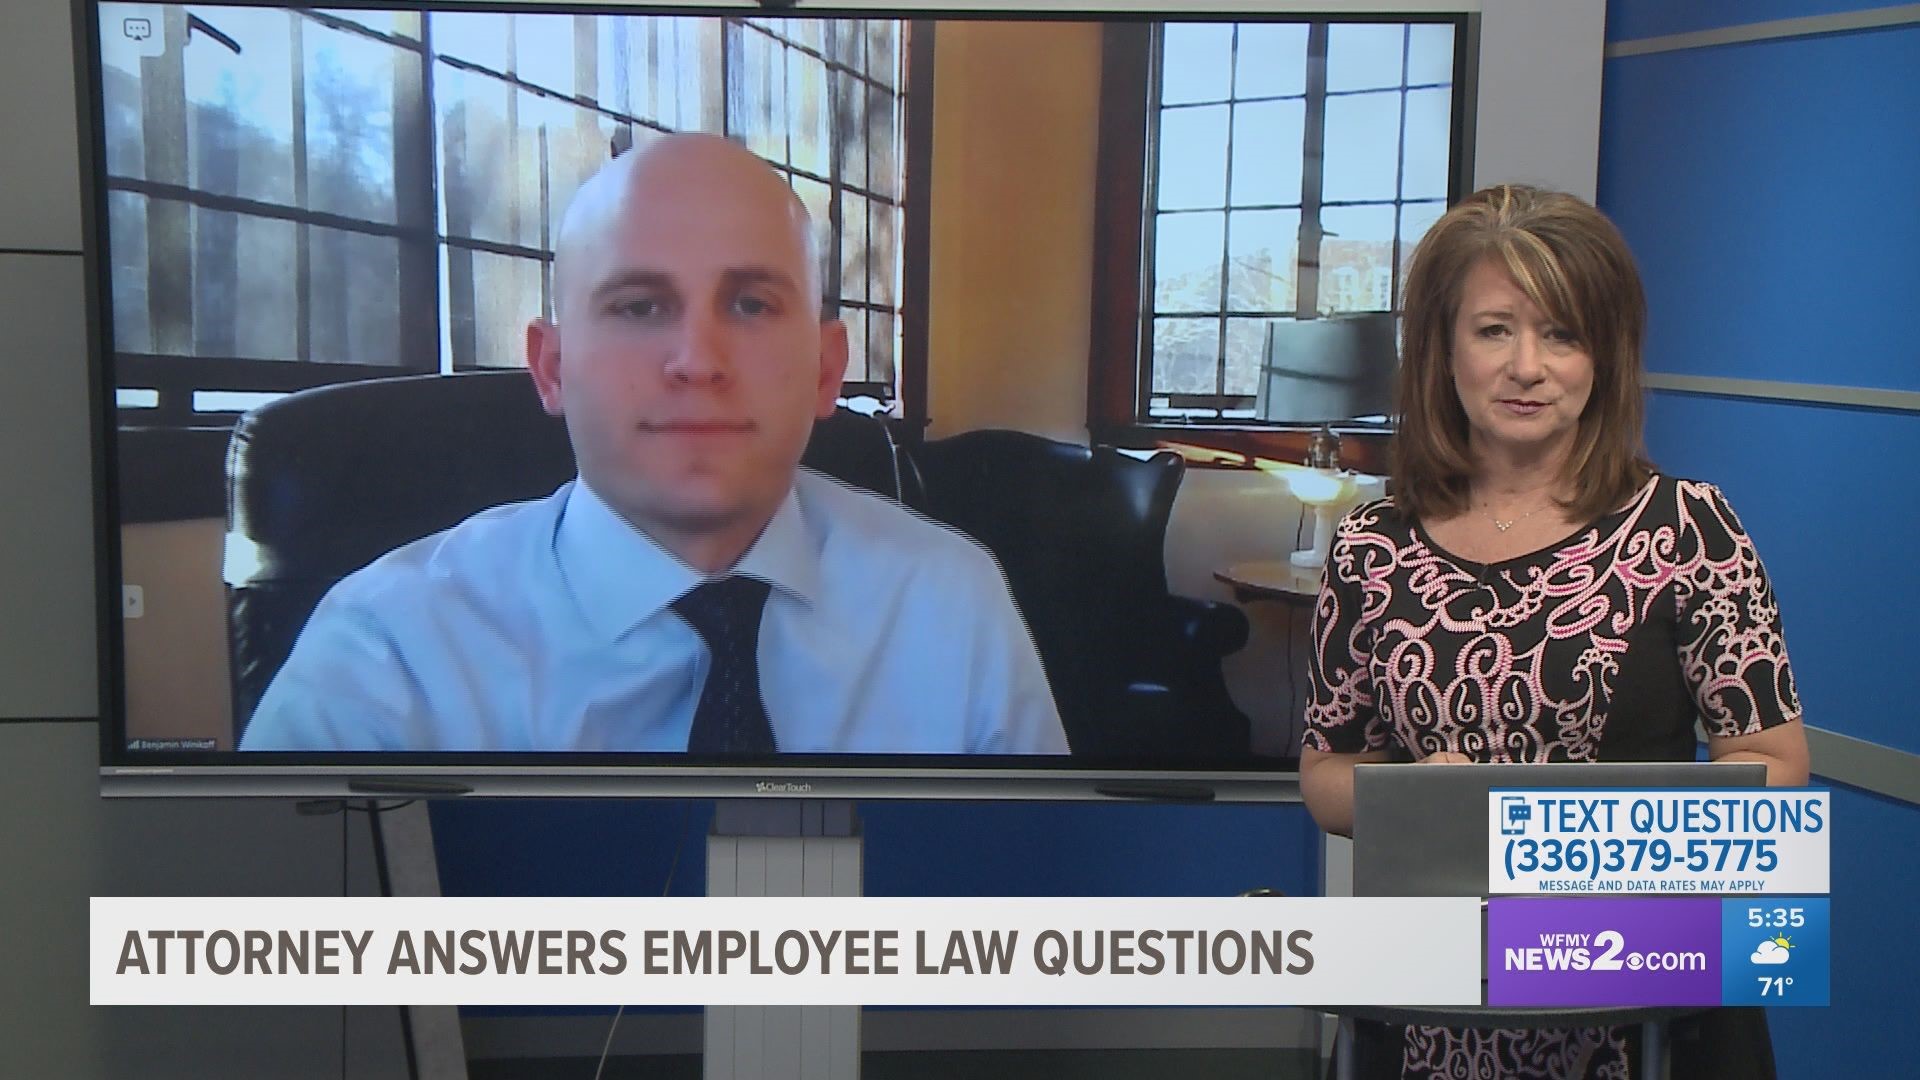 Benjamin Winikoff from EMP Law answers common employment law questions ahead of 4All Statewide Service Day